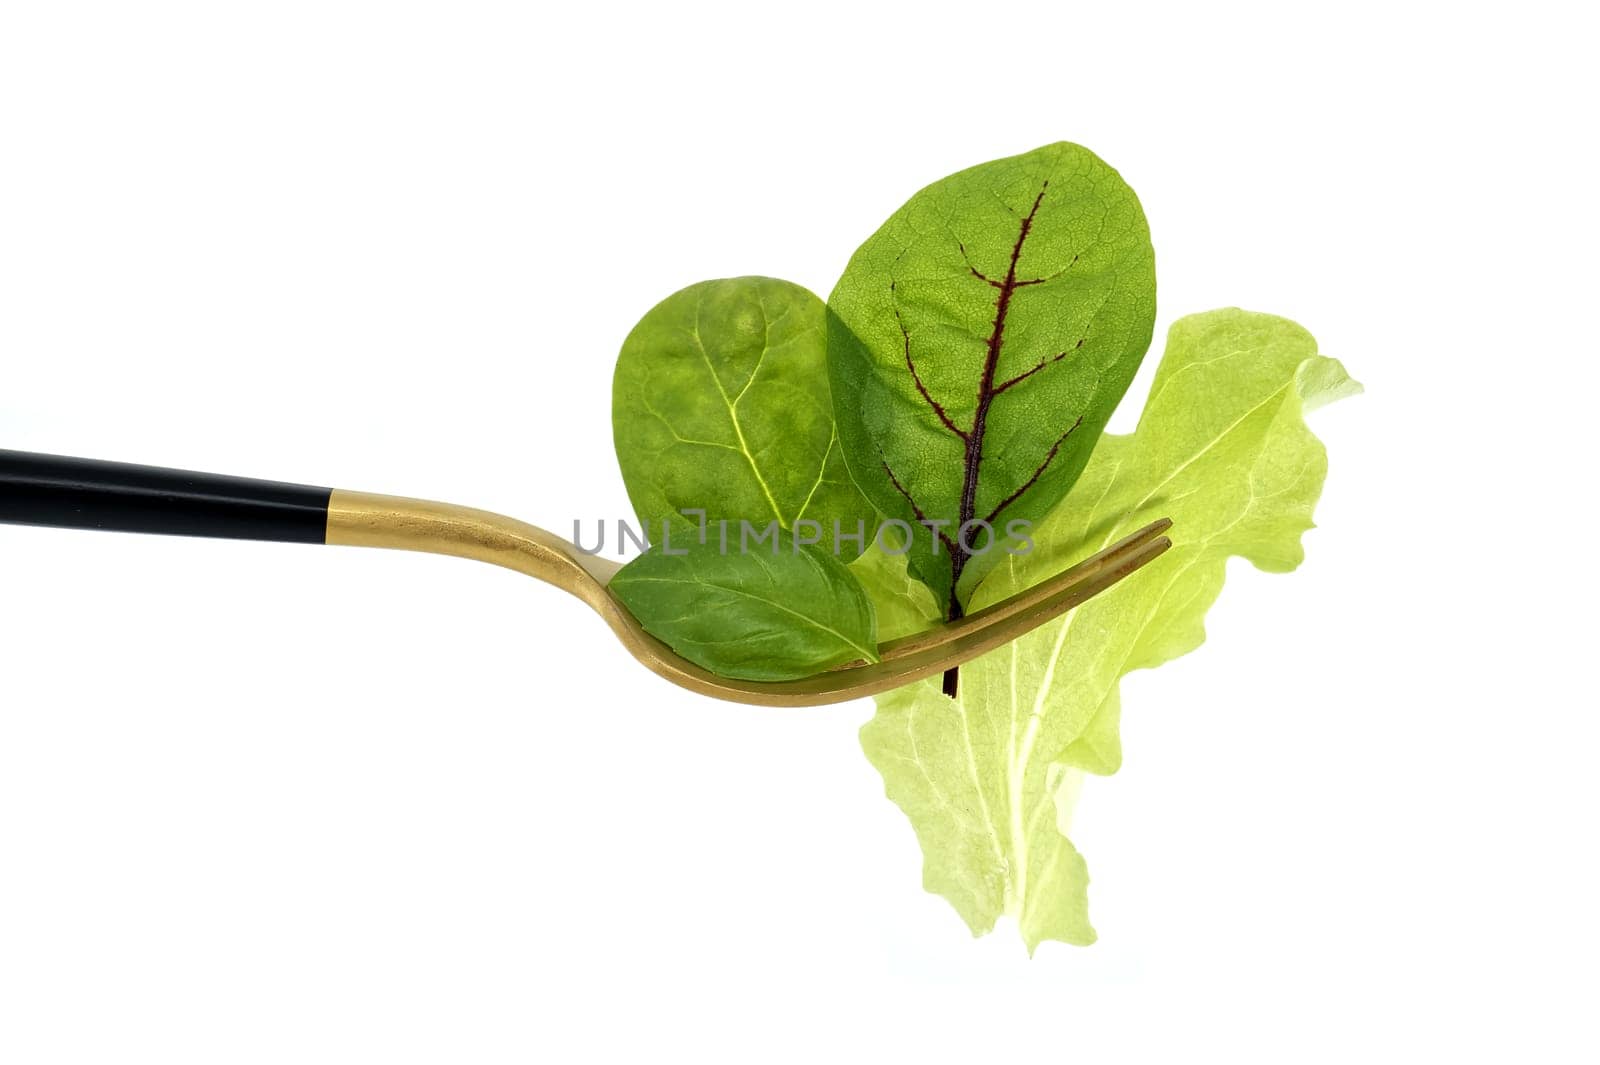 Simple and striking presentation of a spring lettuces leaves mix on a fork with a black handle against a pure white background, concept of healthy diet and organic food